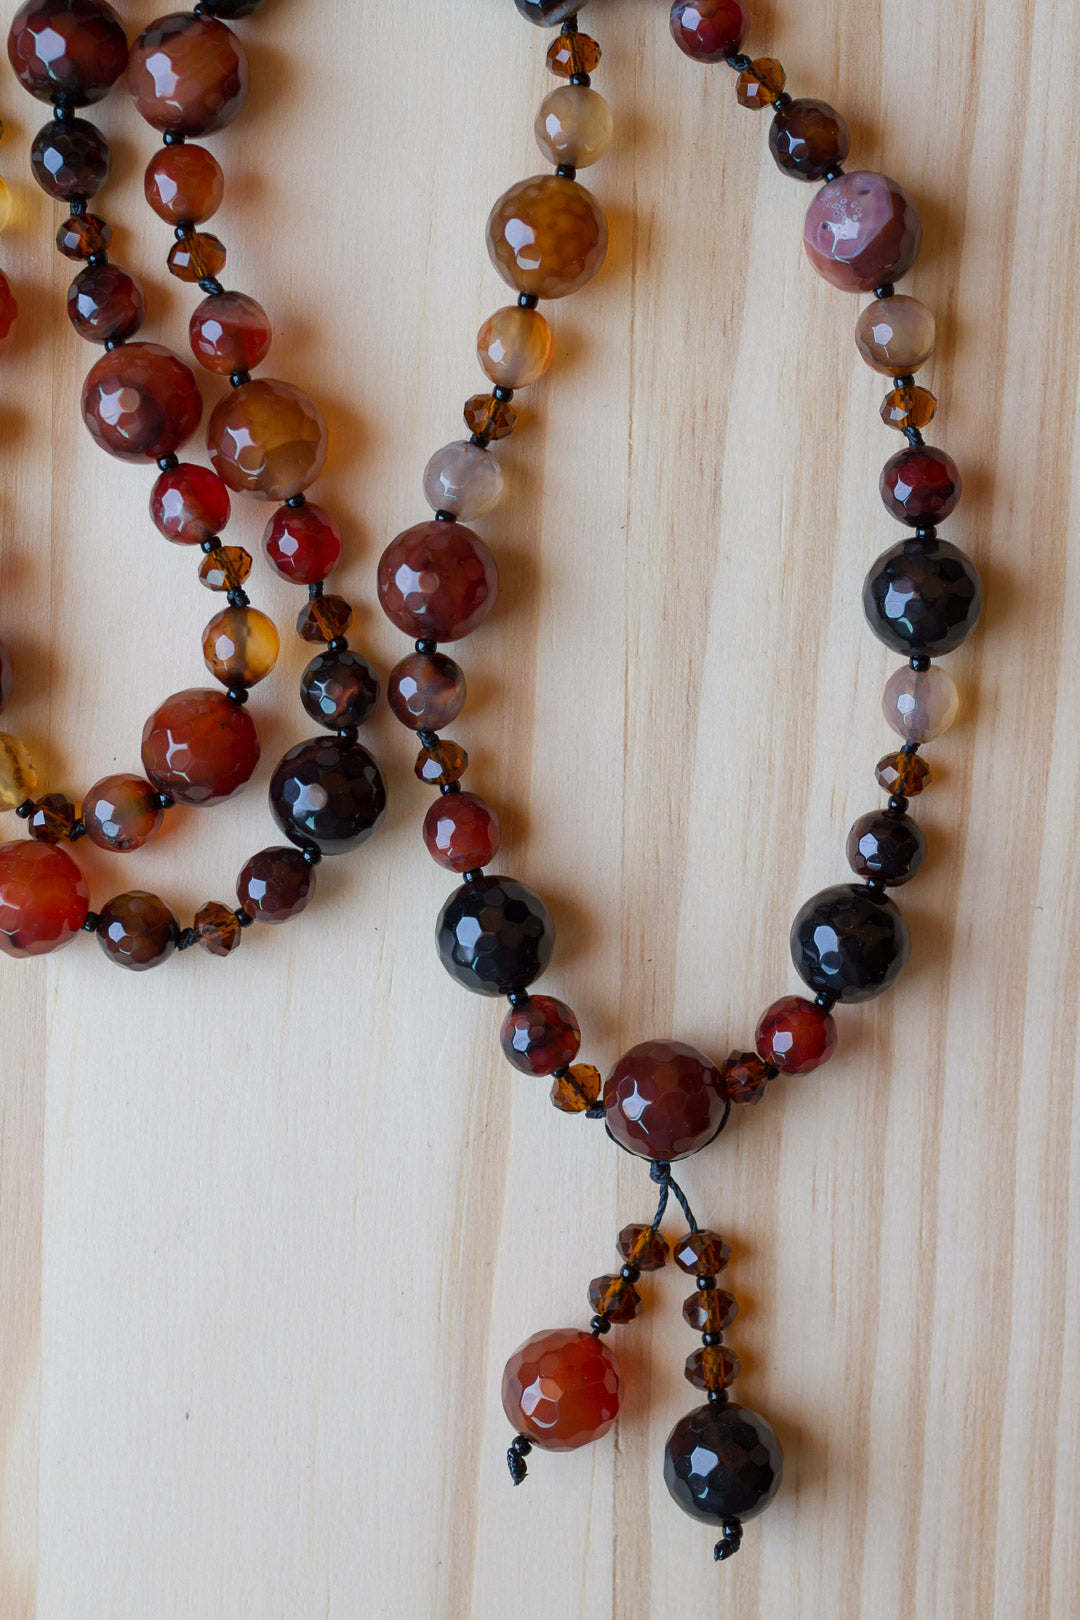 30" Black Brown Agate Beaded Necklace with Crystal Beads